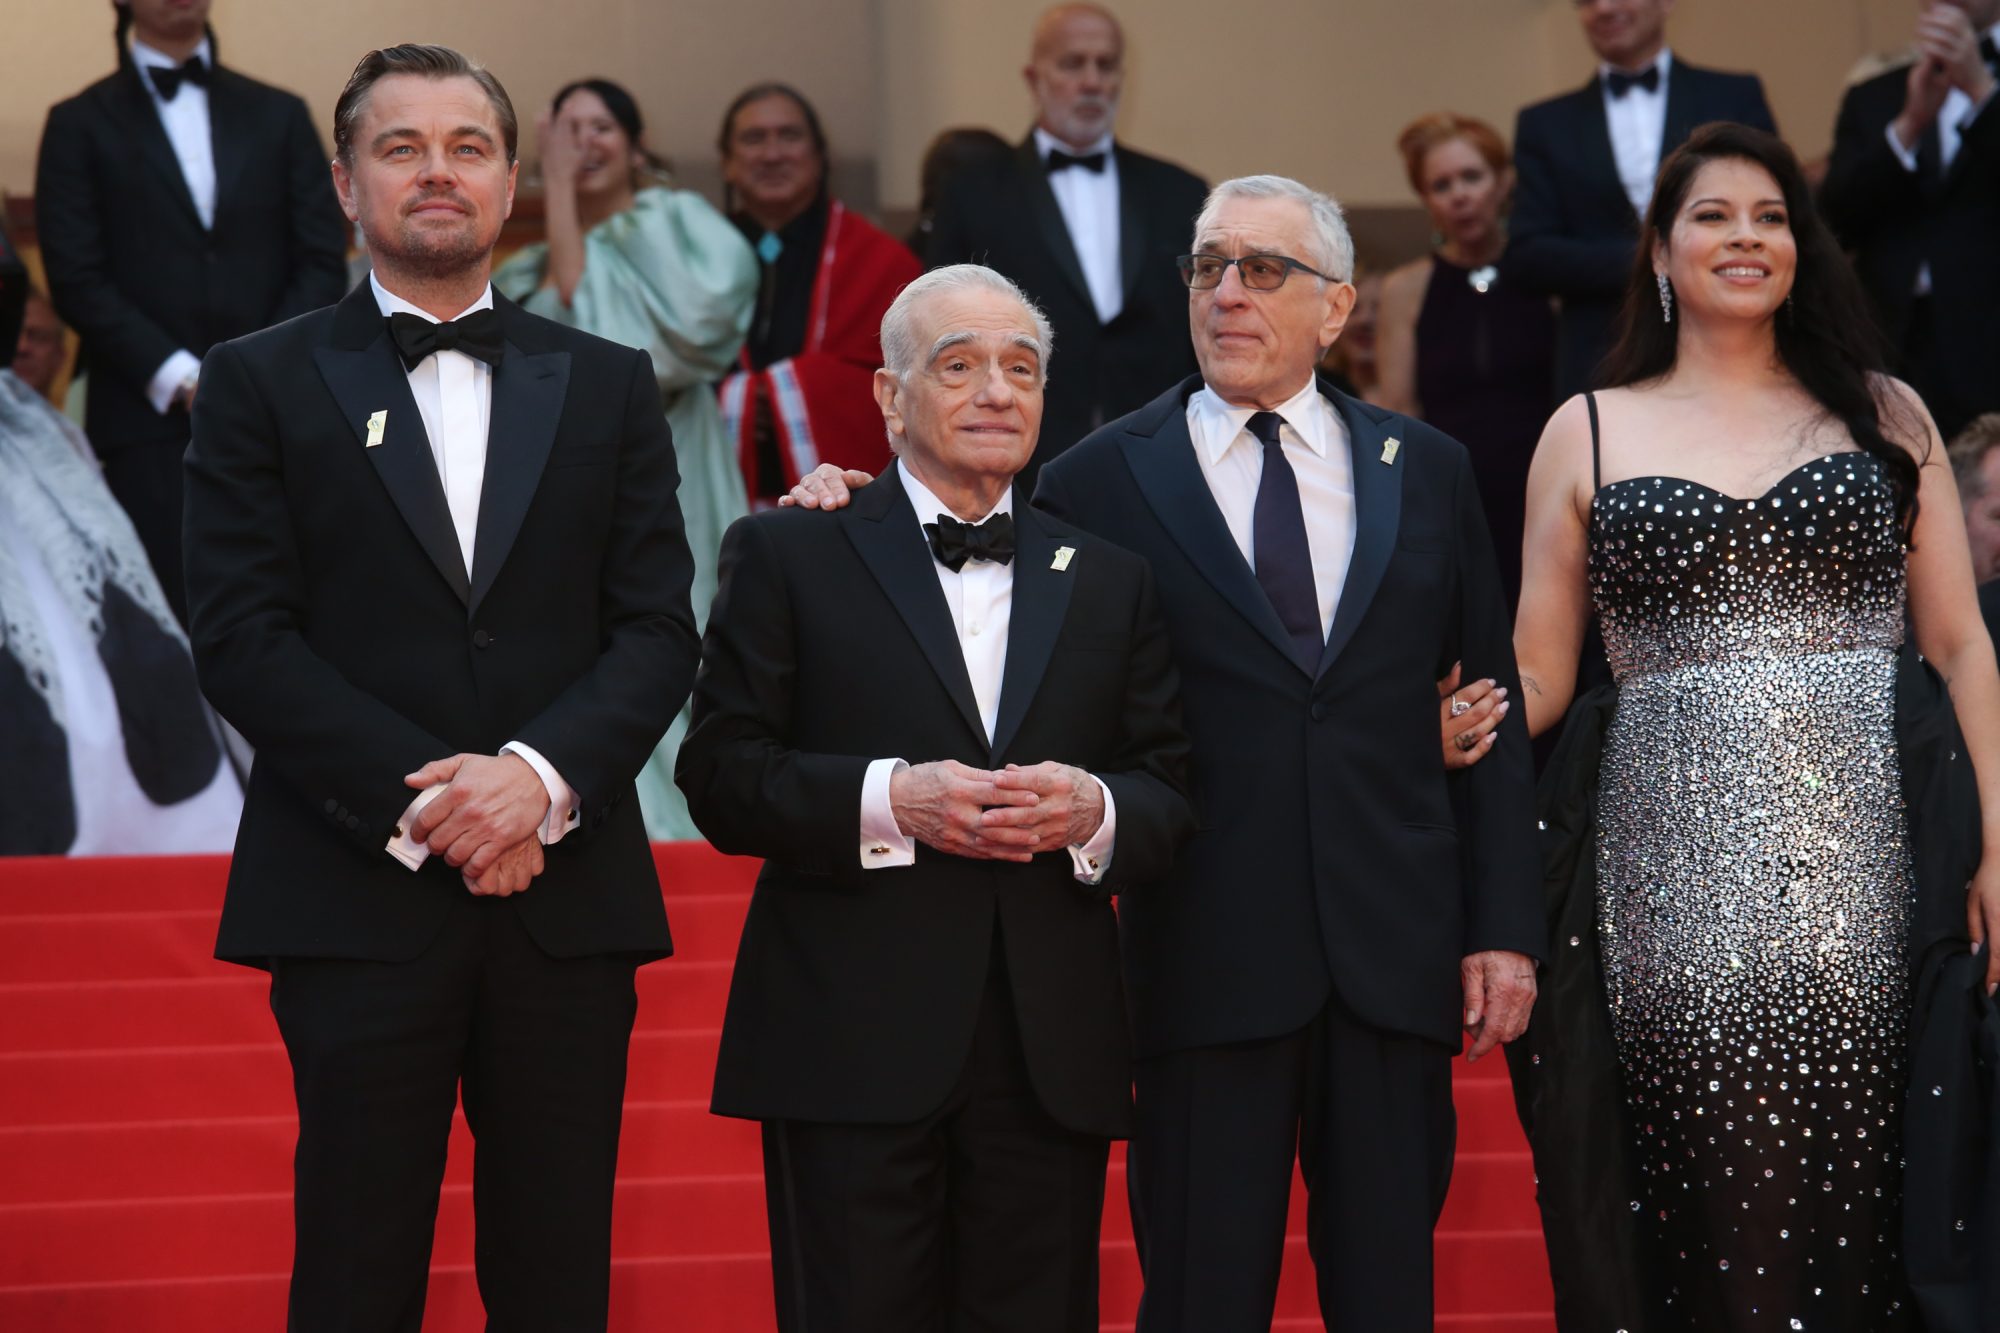 76th Cannes Film Festival. Red carpet of the film "Killers of the flower moon". Leonardo DiCaprio, Martin Scorsese, Robert De Niro and Cara Jade Myers. ©Isabelle Vautier pour CineSerie.